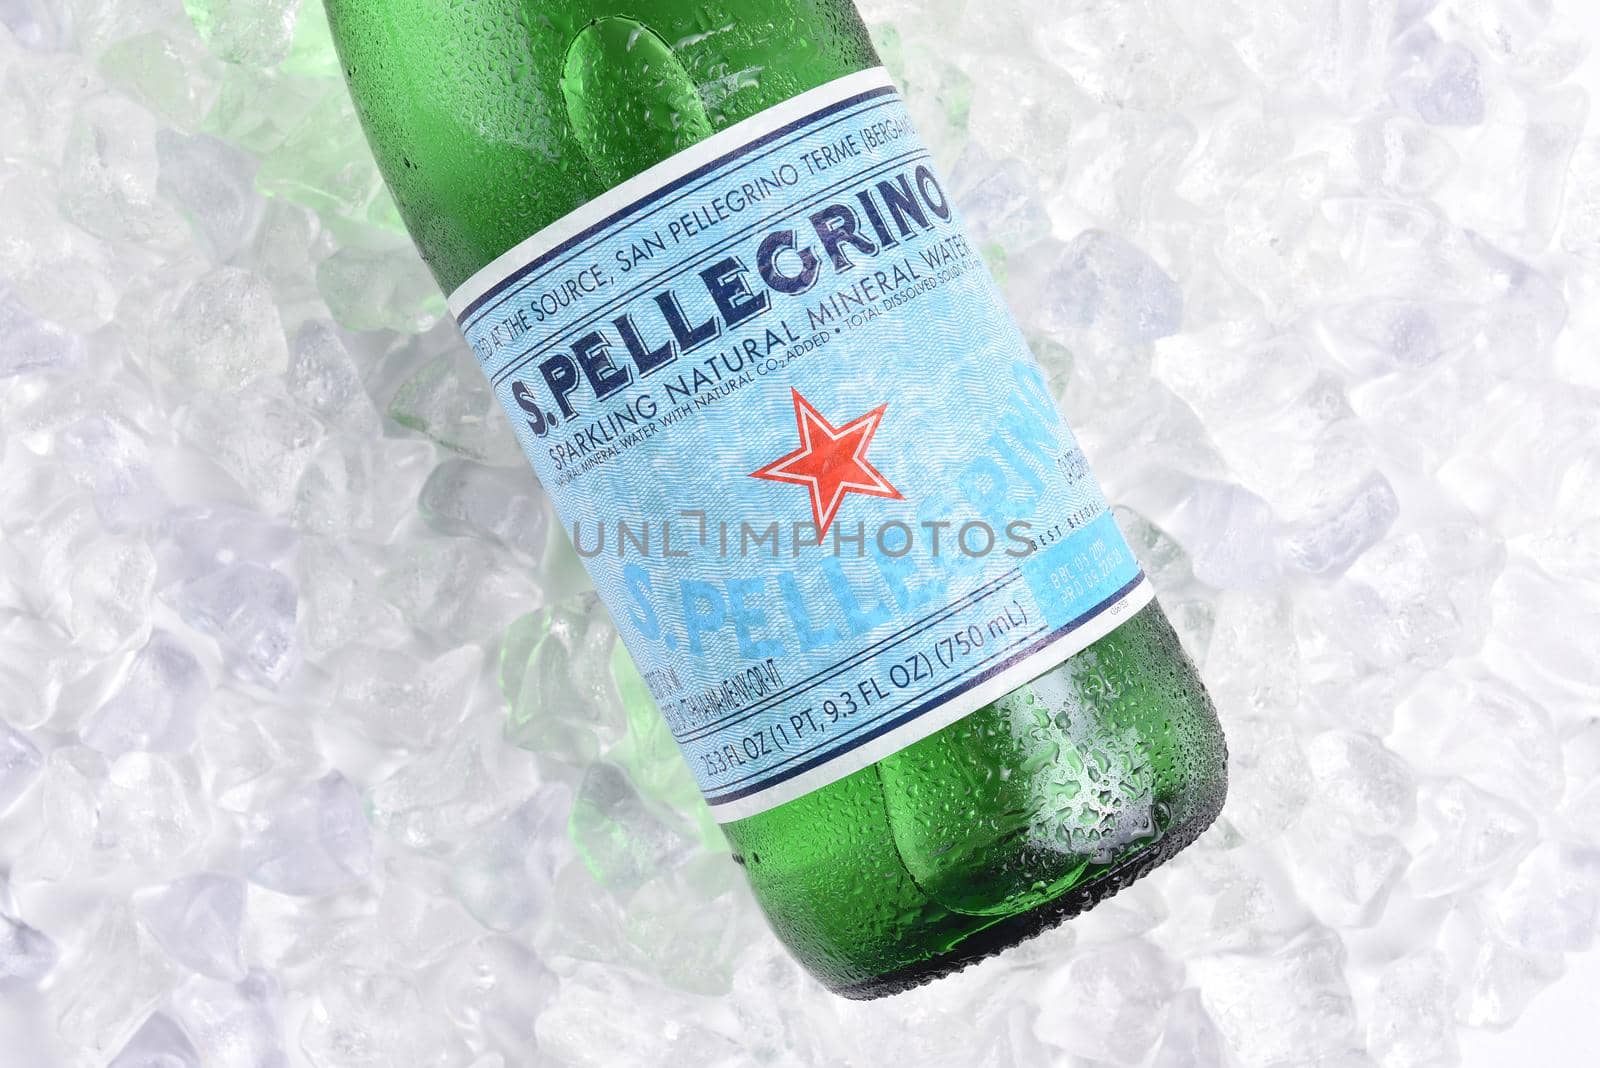 IRVINE, CALIFORNIA - MARCH 16, 2017: San Pellegrino Mineral Water on ice.  The sparkling water is produced in San Pellegrino Terme, in the Province of Bergamo, Lombardy, Italy.